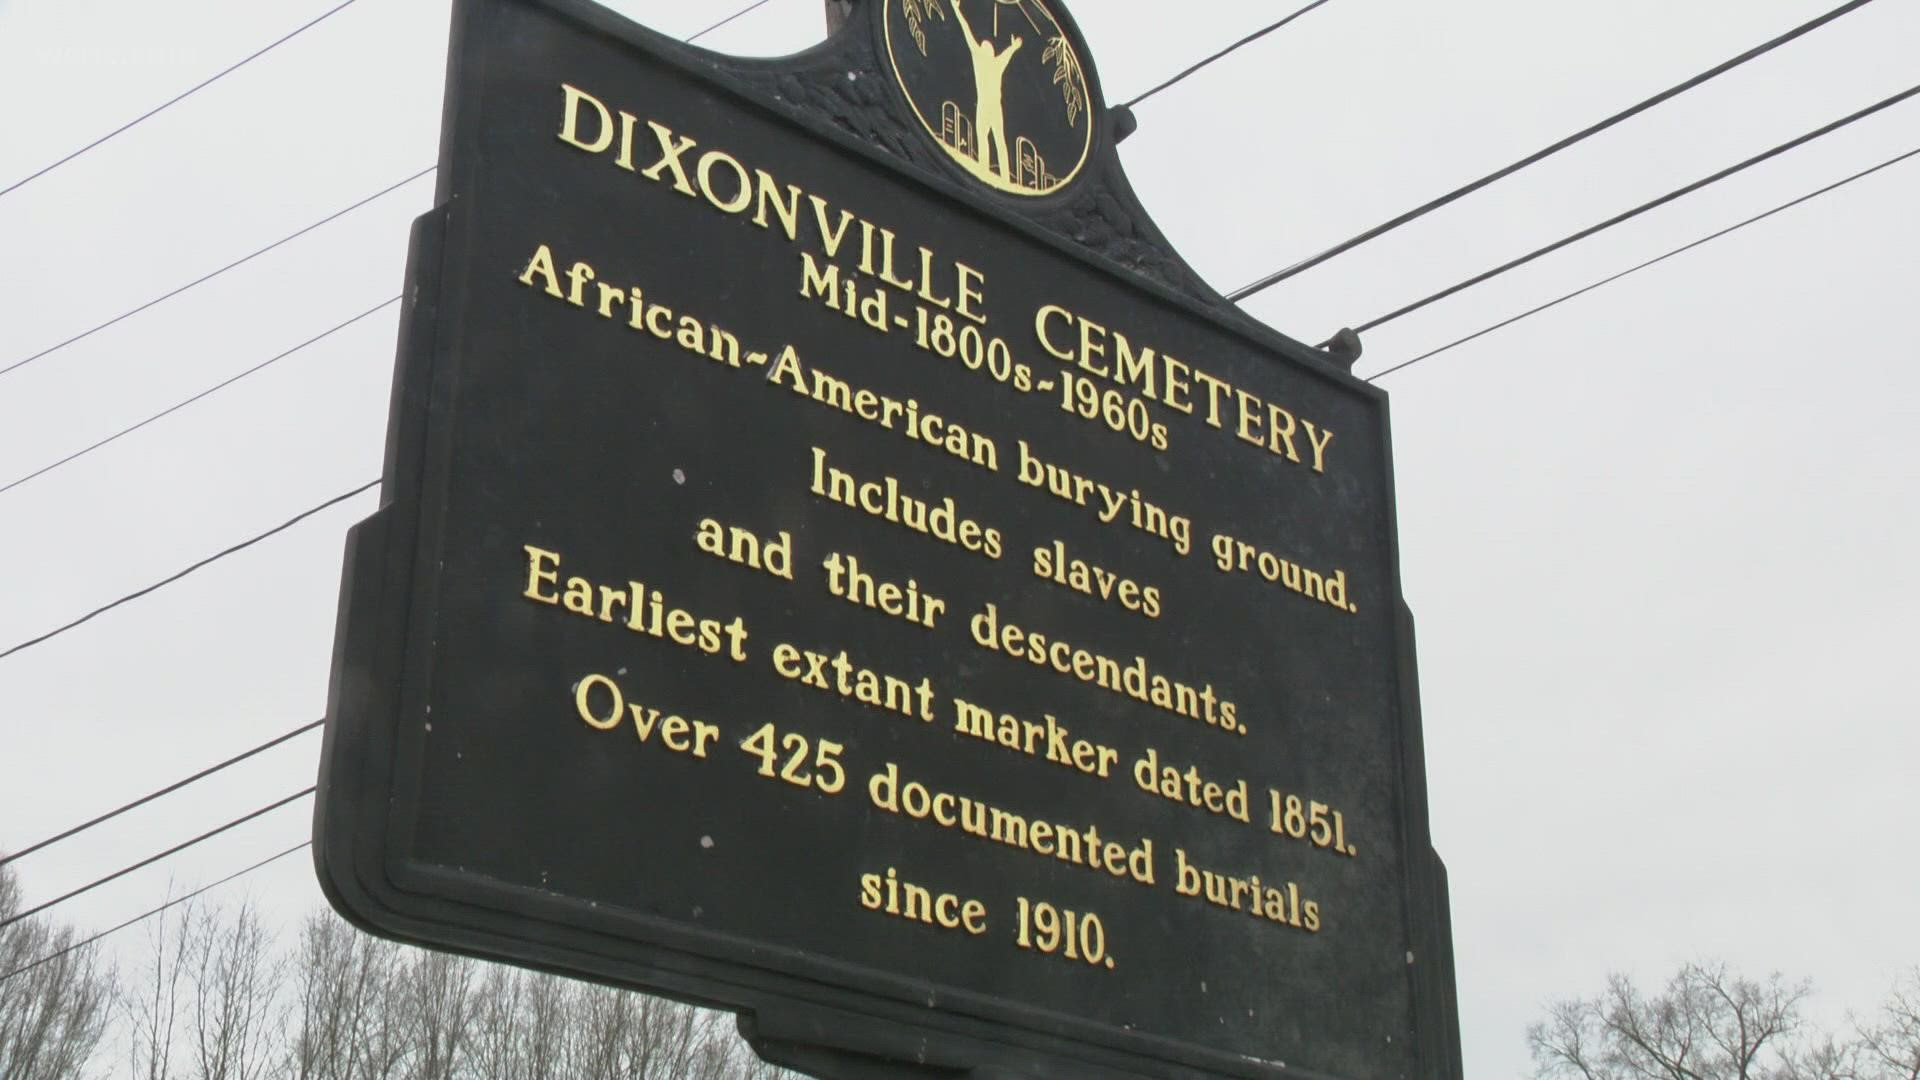 Members of a task force in Salisbury are collecting money to repair damaged headstones at a historically Black cemetery.